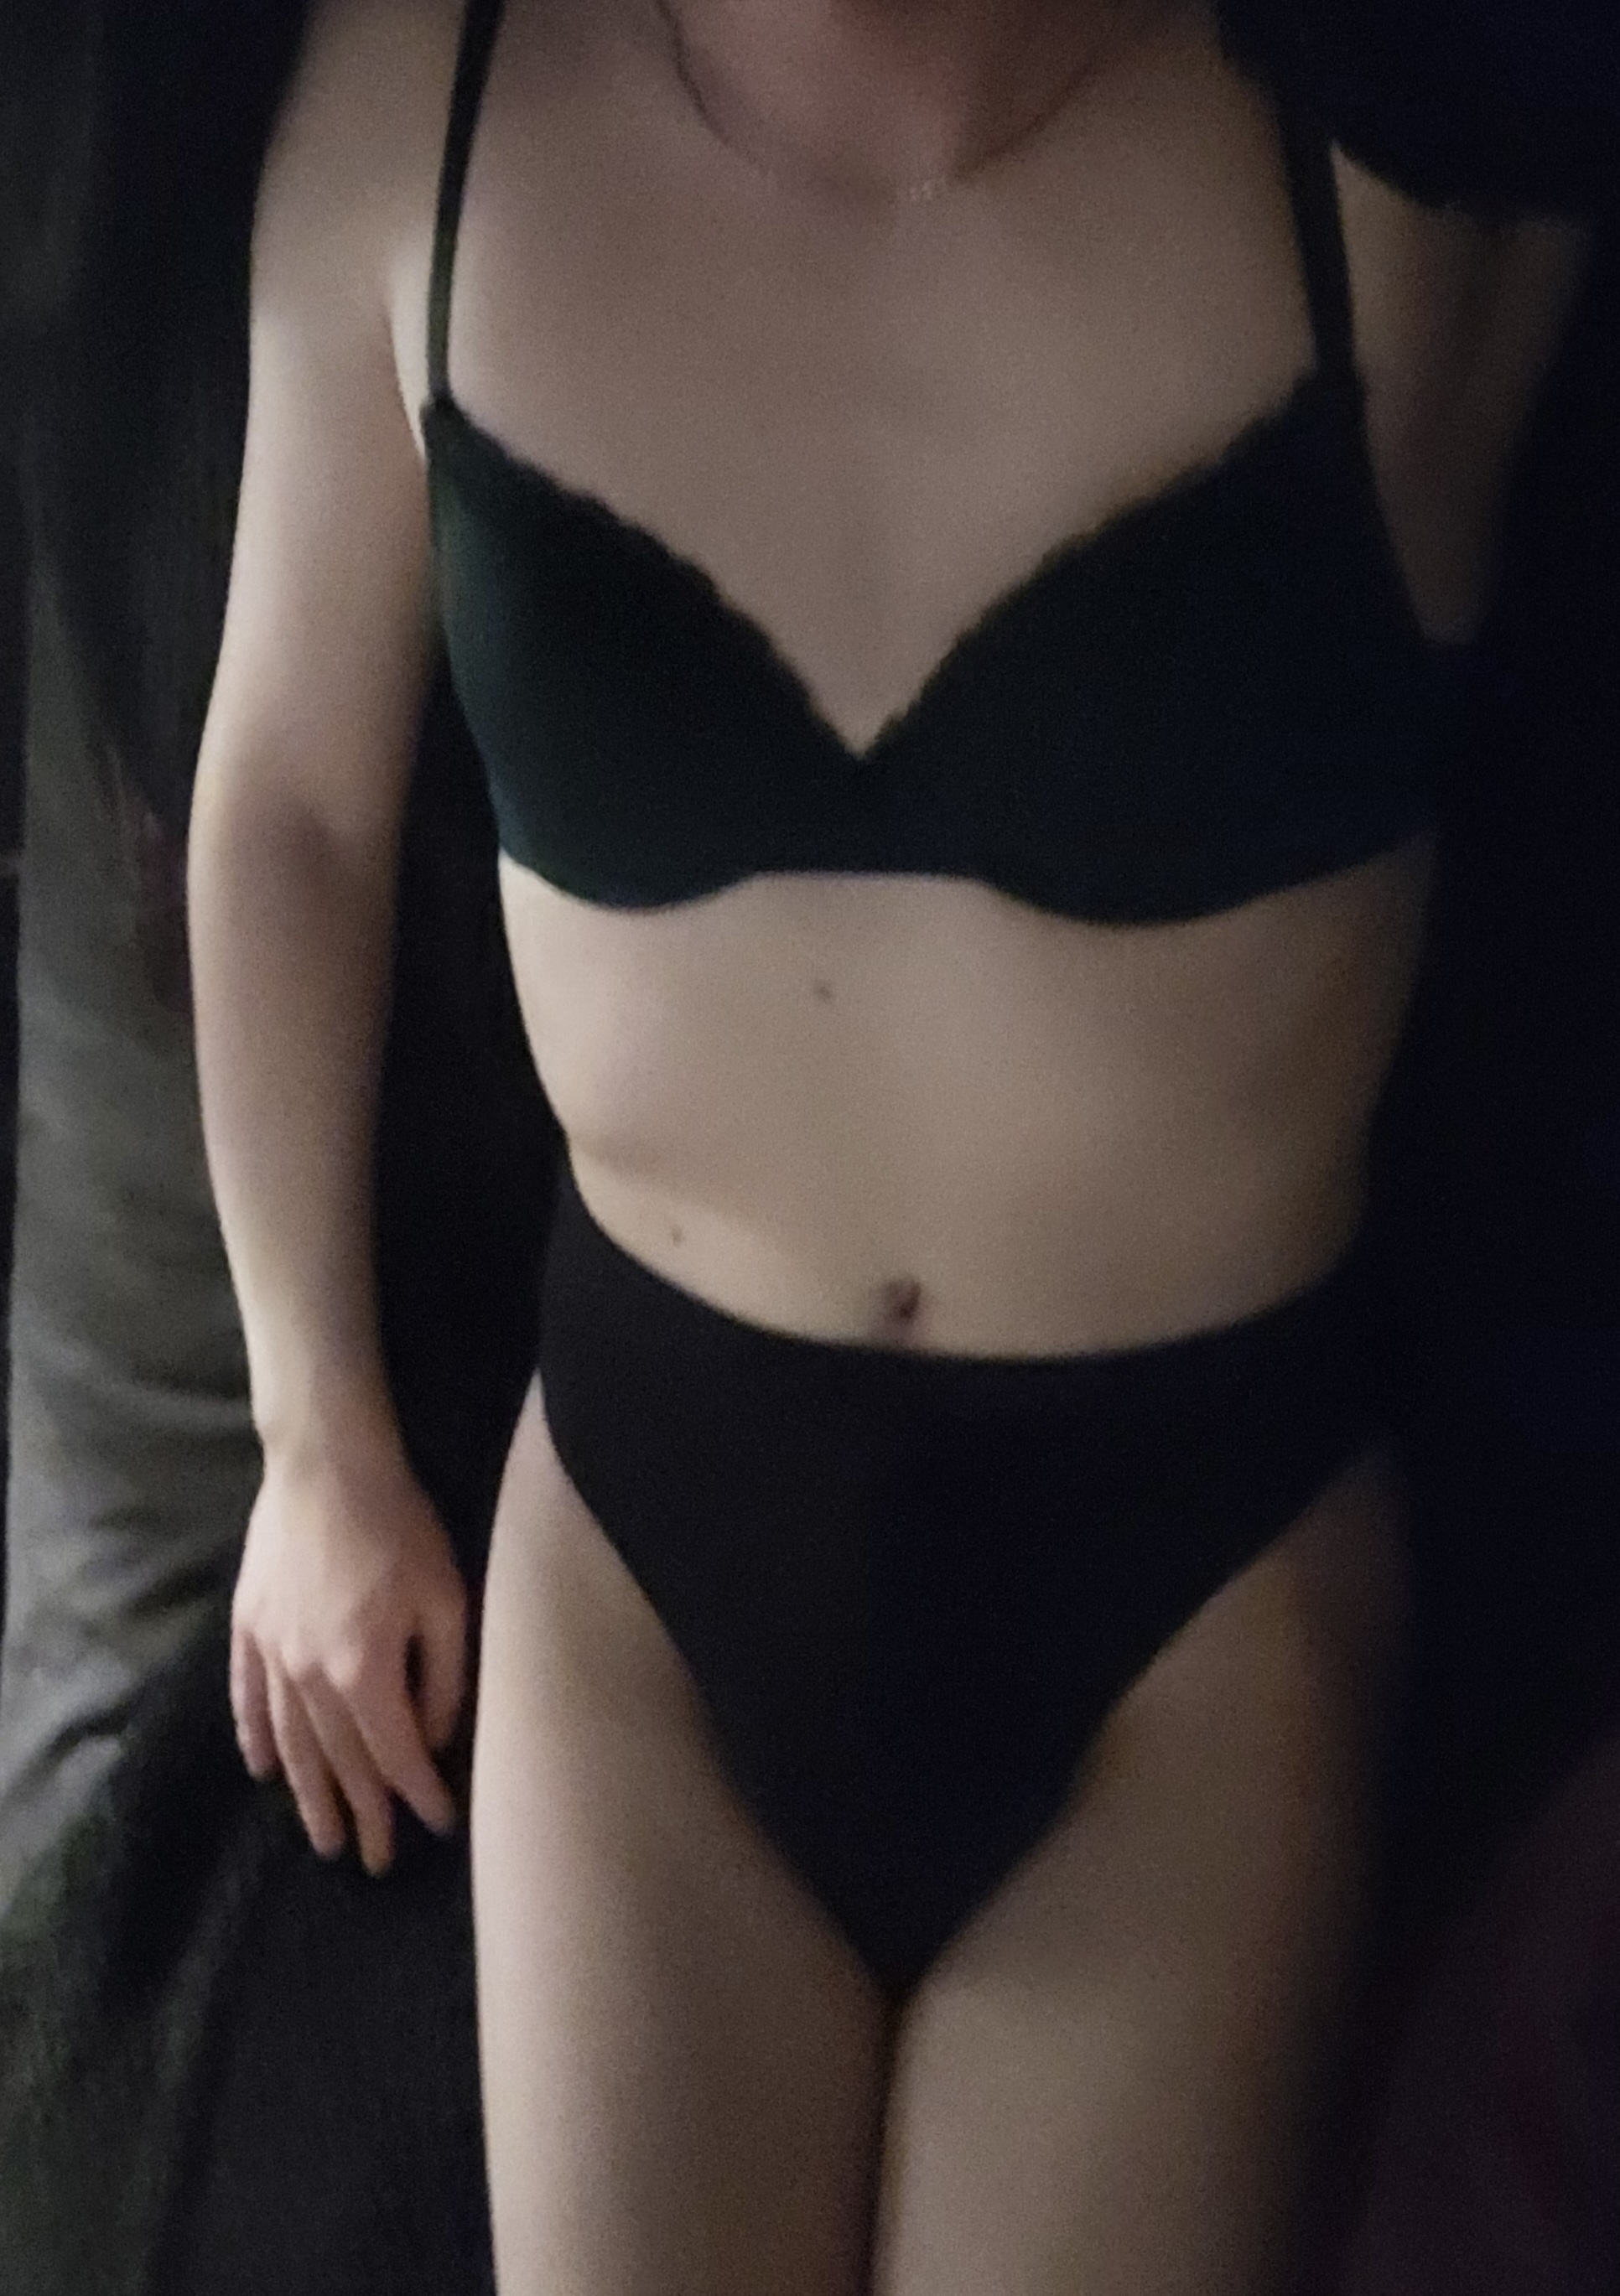 a woman wearing a black garment and underwear